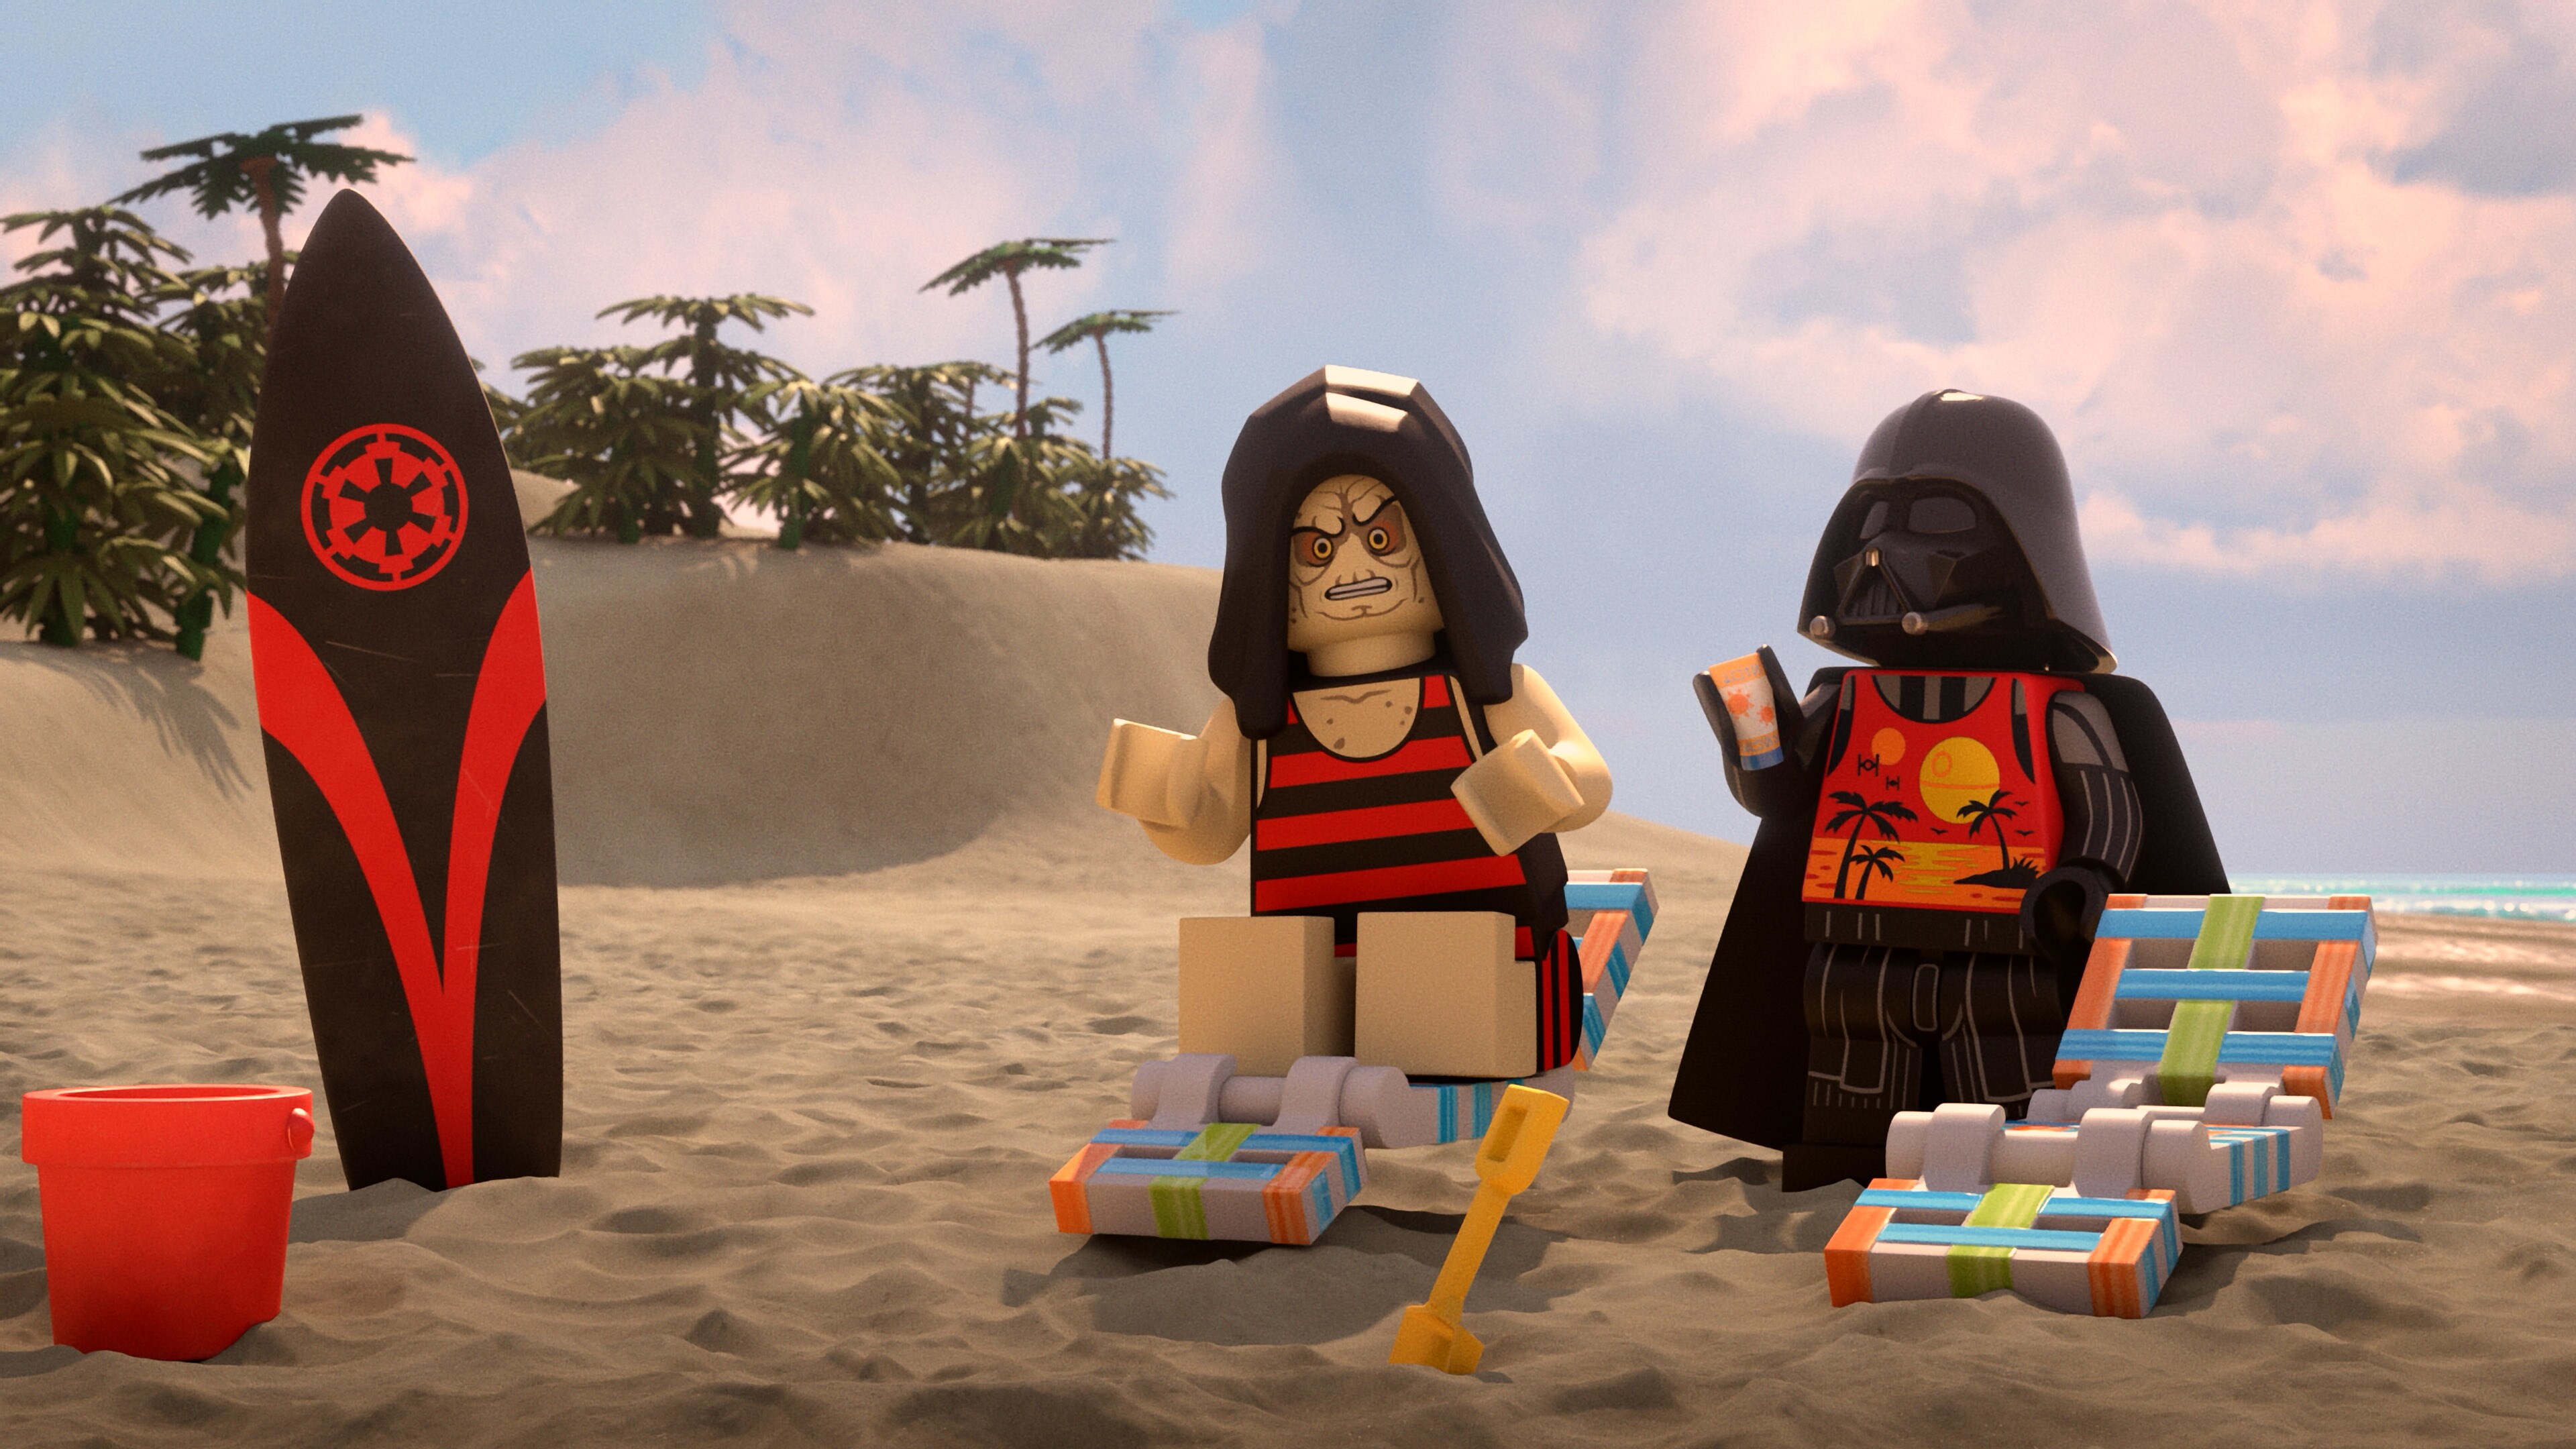 SUMMER GETS HOTTER WITH NEW CLIP AND POSTER FOR “LEGO® STAR WARS SUMMER VACATION,” PREMIERING 5 AUGUST, 2022, EXCLUSIVELY ON DISNEY+  